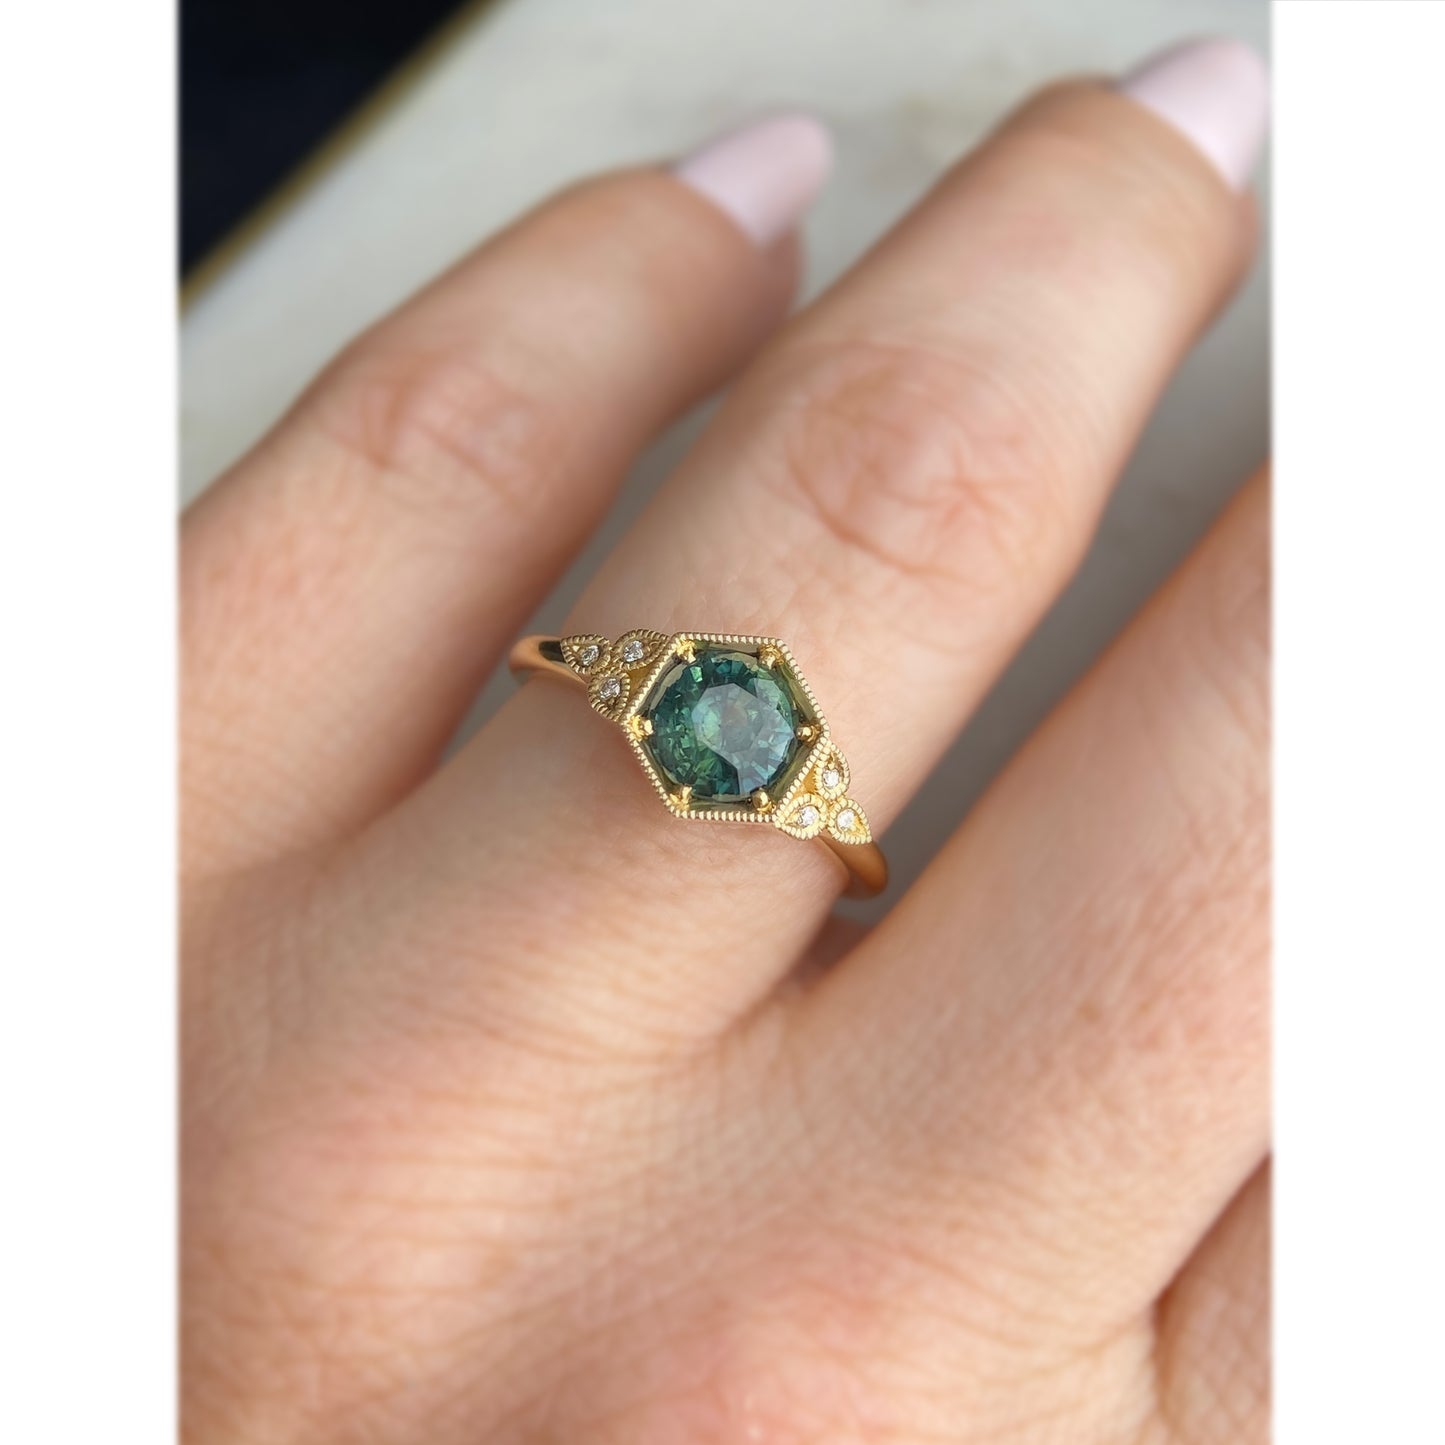 Vintage Style Hexagon Teal Sapphire Miligrain Engagement Ring 14K yellow gold